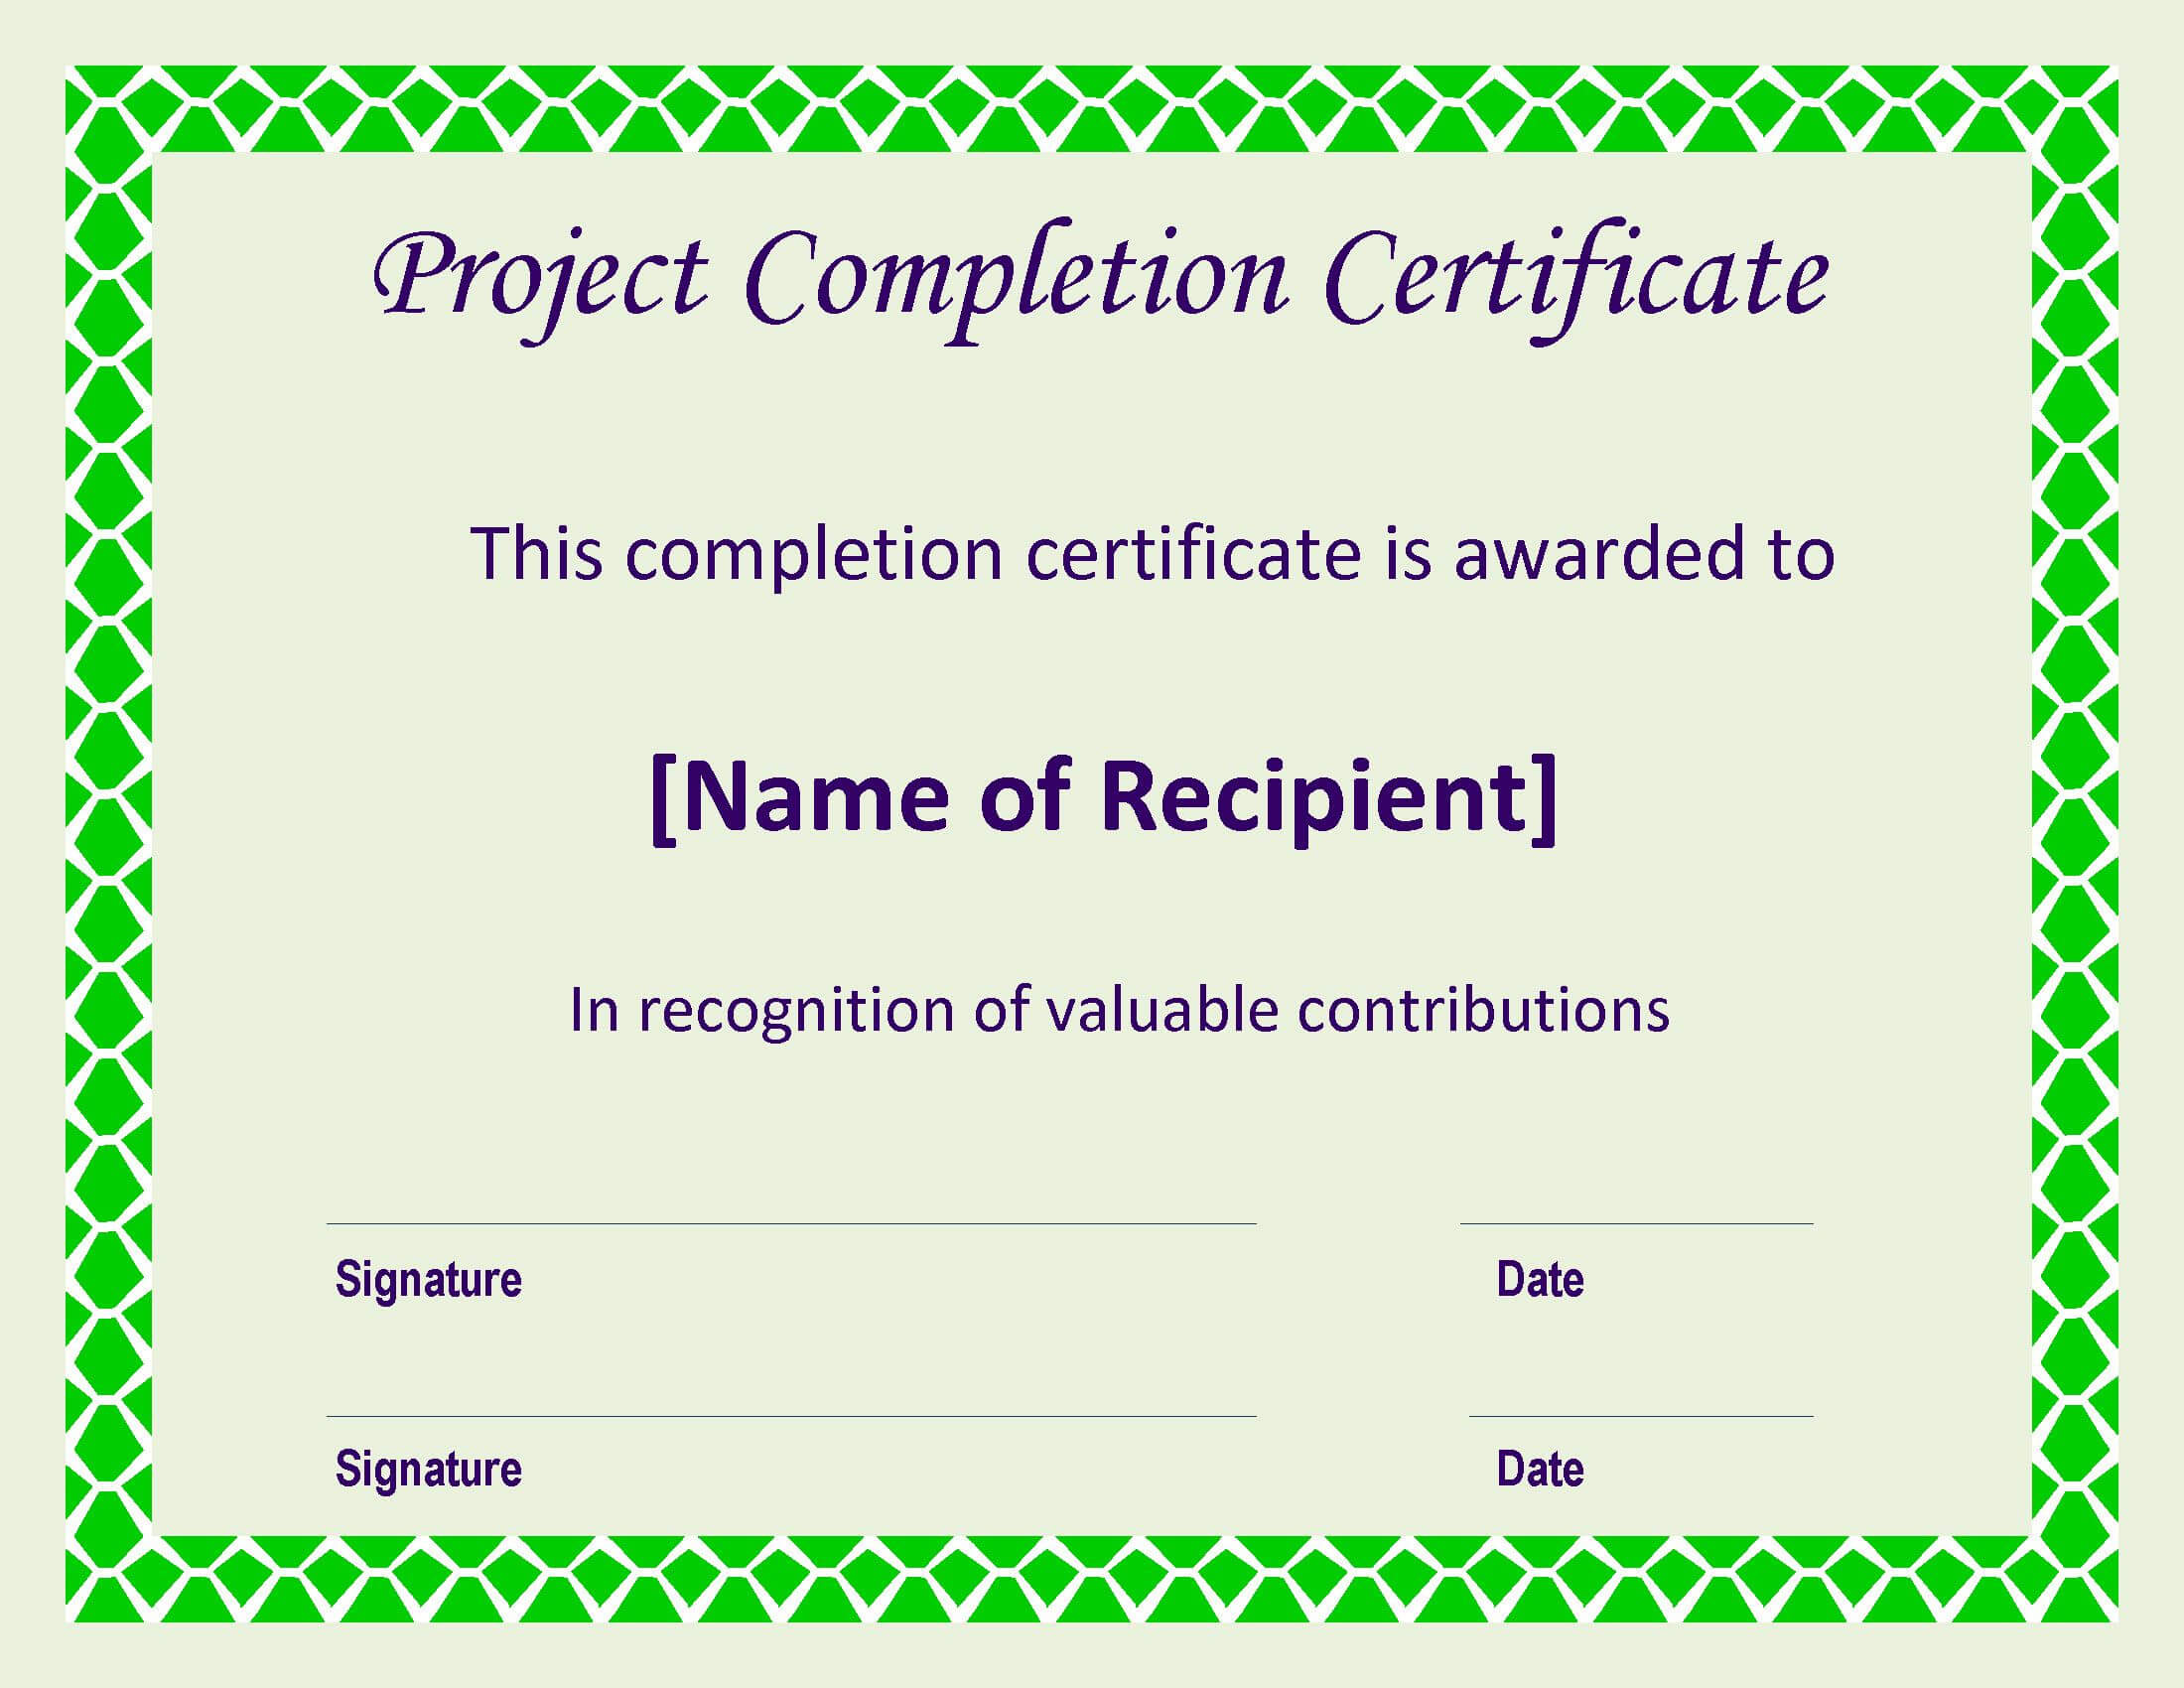 Certificate Of Completion Project | Templates At In Certificate Template For Project Completion